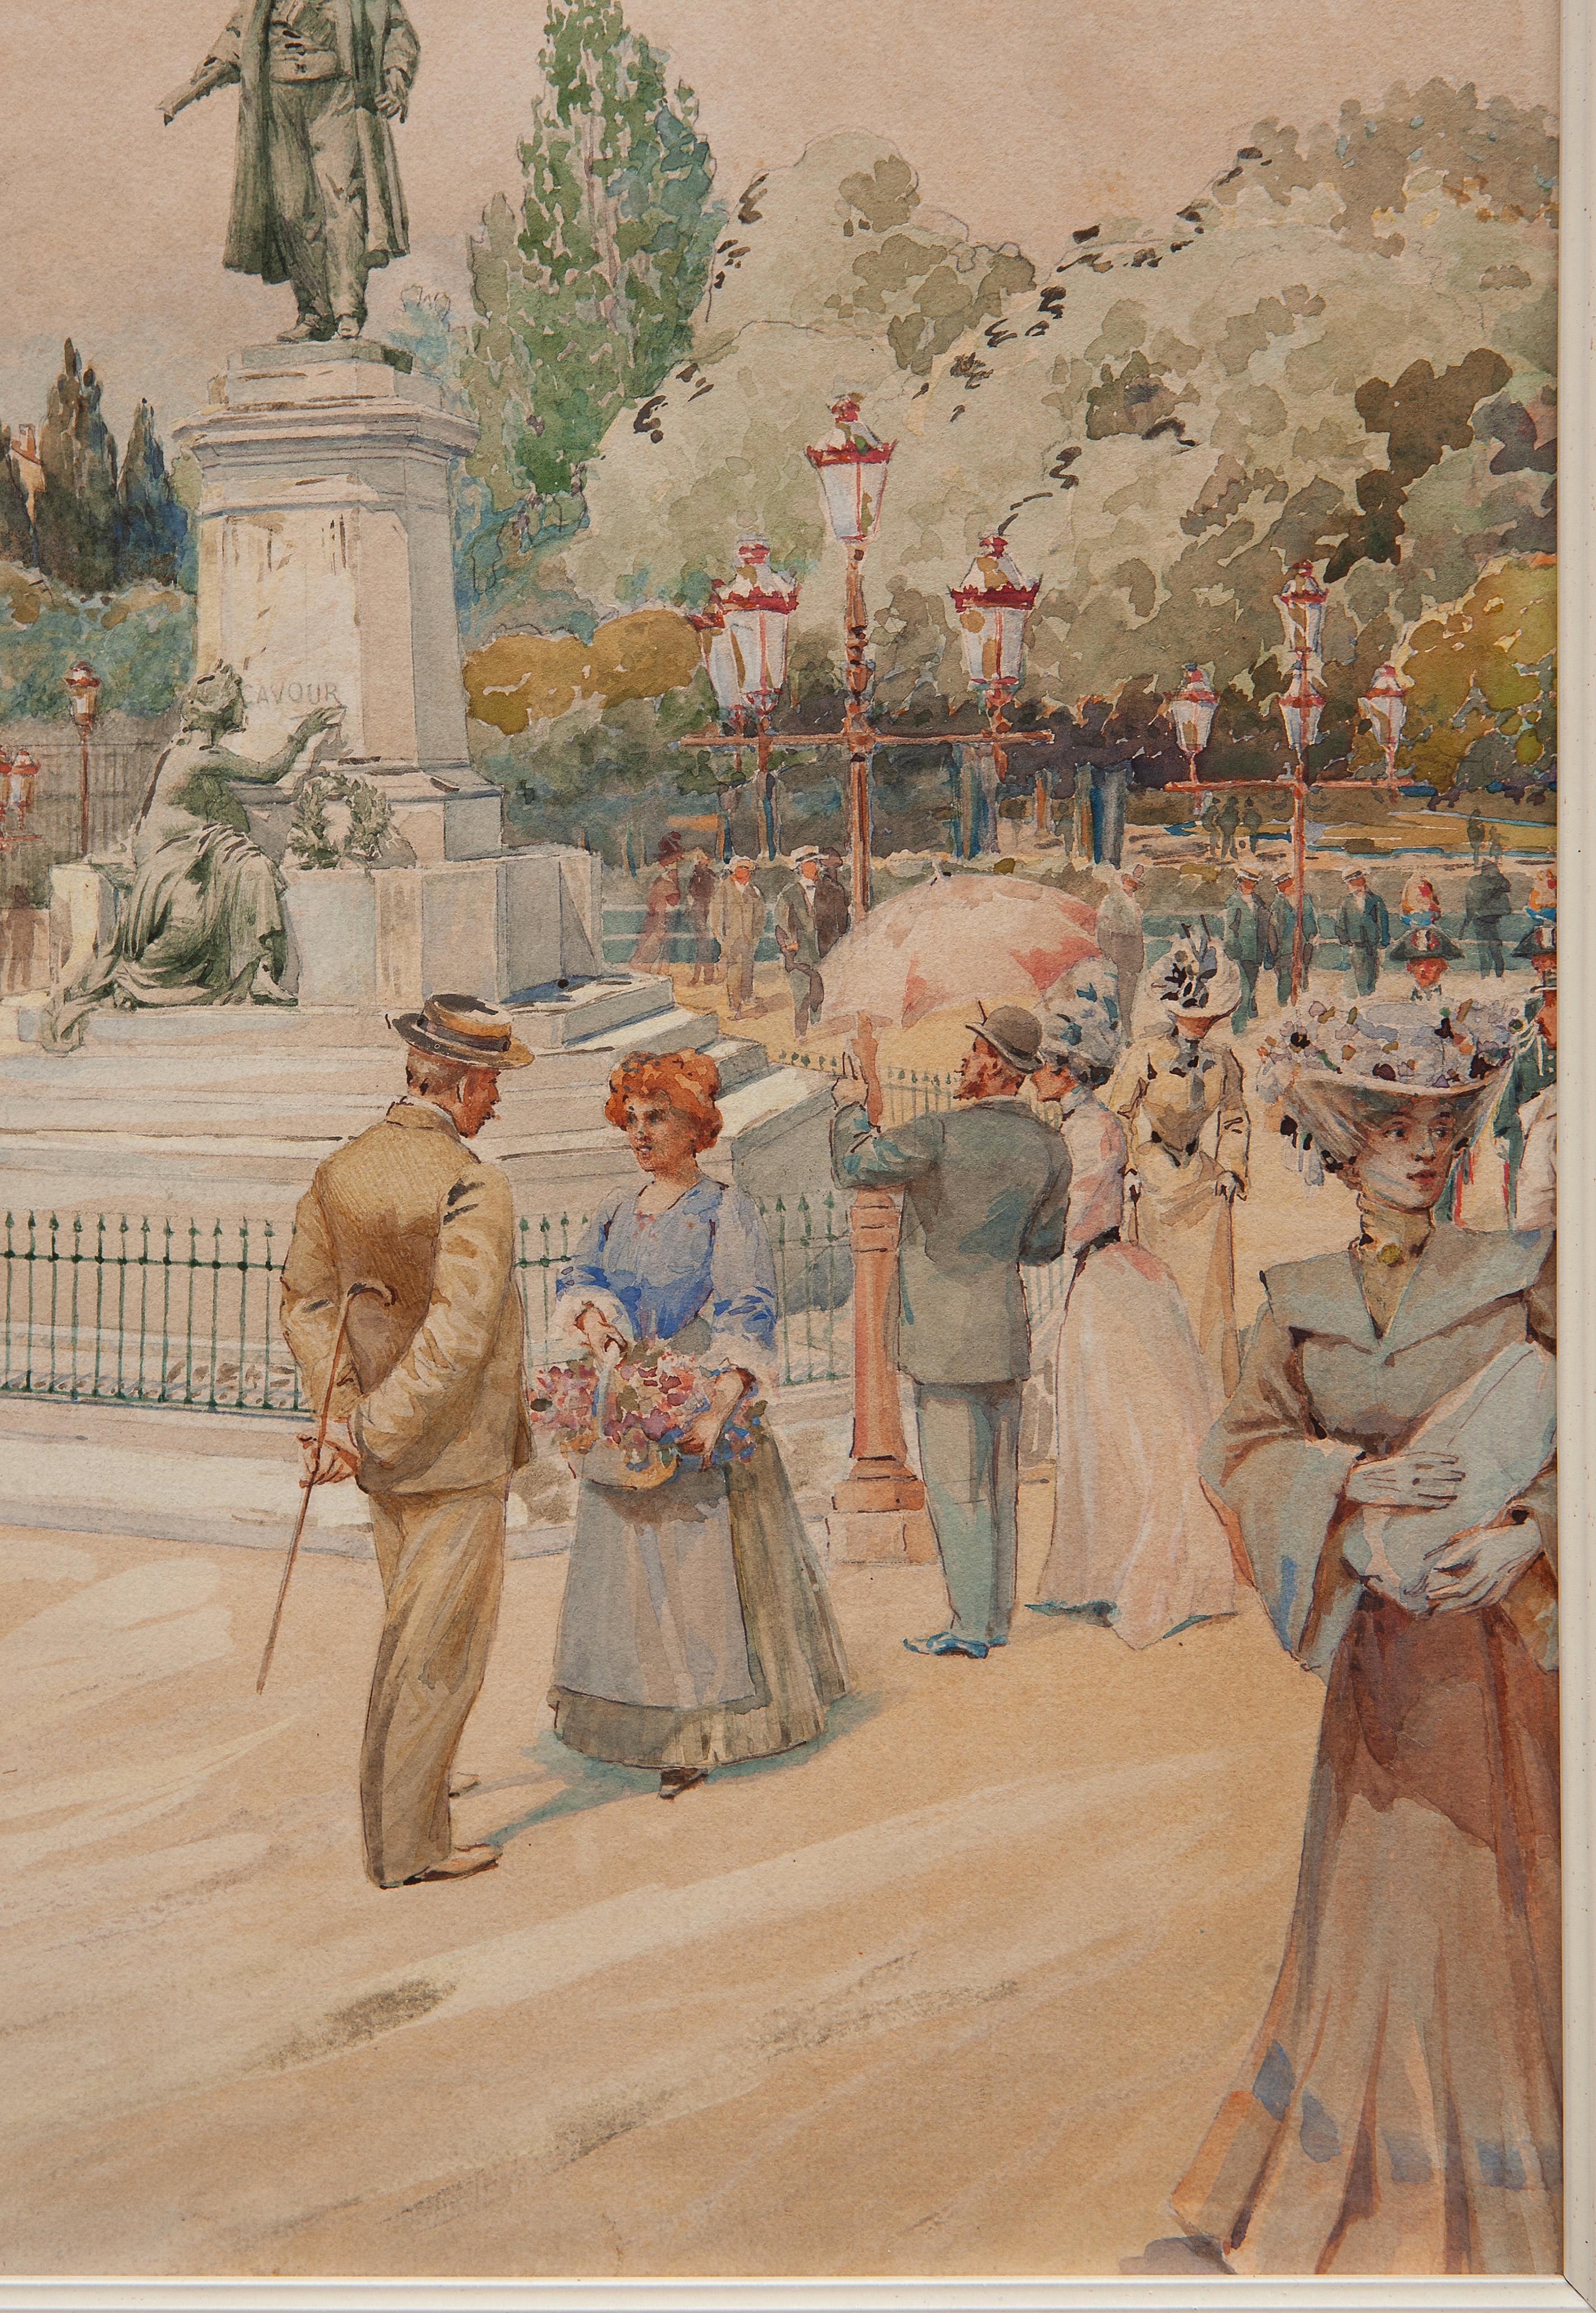 A. Cirnello
Piazza Cavour in Milan, with the monument to Camillo Benso Conte di Cavour
Dated 1905
Watercolor painting on paper
Size: 49x37 cm  (69x56 cm including the frame)
Signed and dated lower left